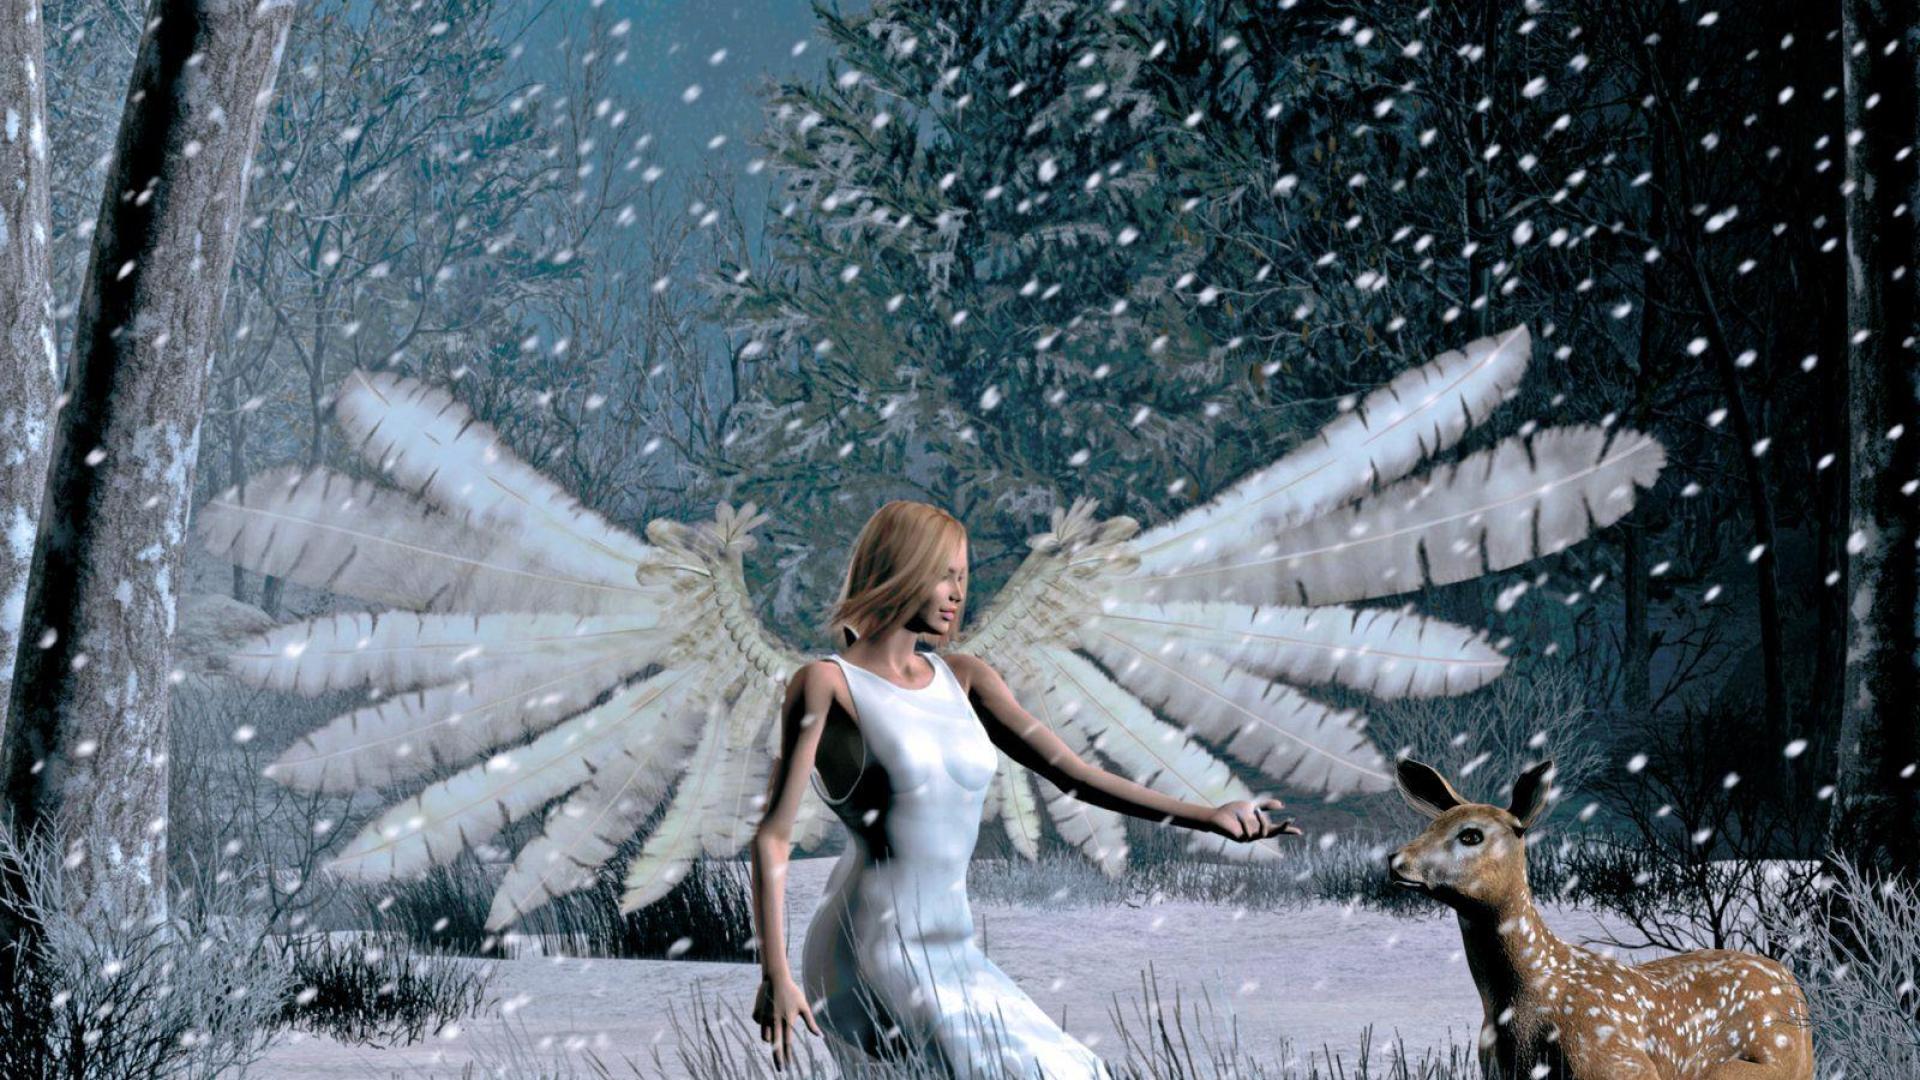 Snow Angel Wallpapers Wallpaper High Definition High Quality Widescreen